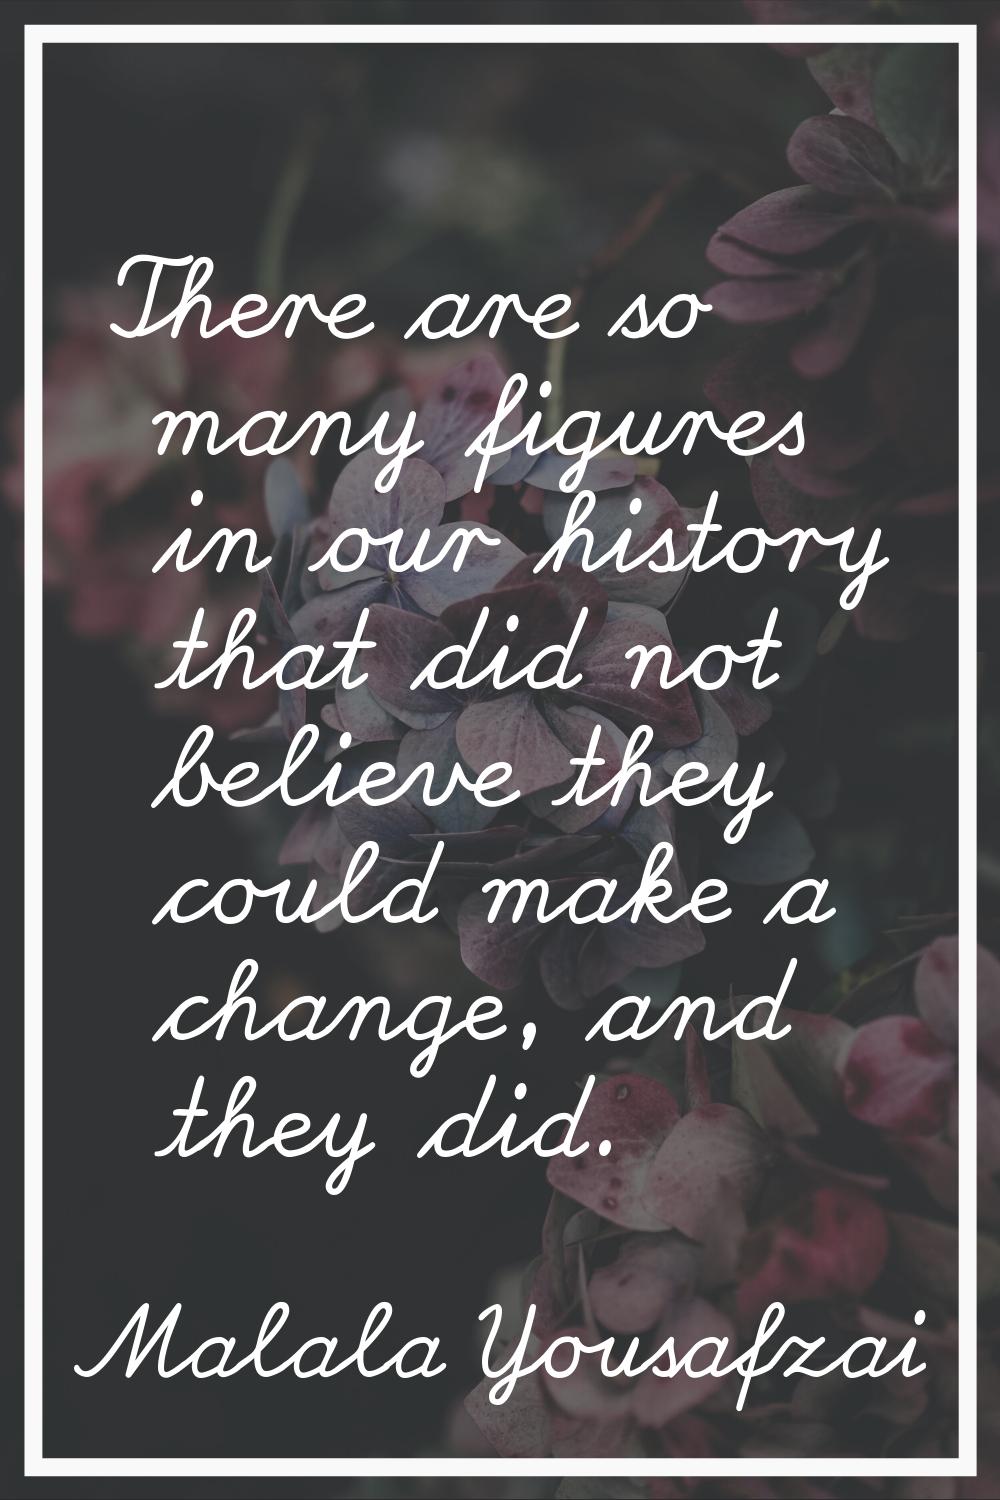 There are so many figures in our history that did not believe they could make a change, and they di